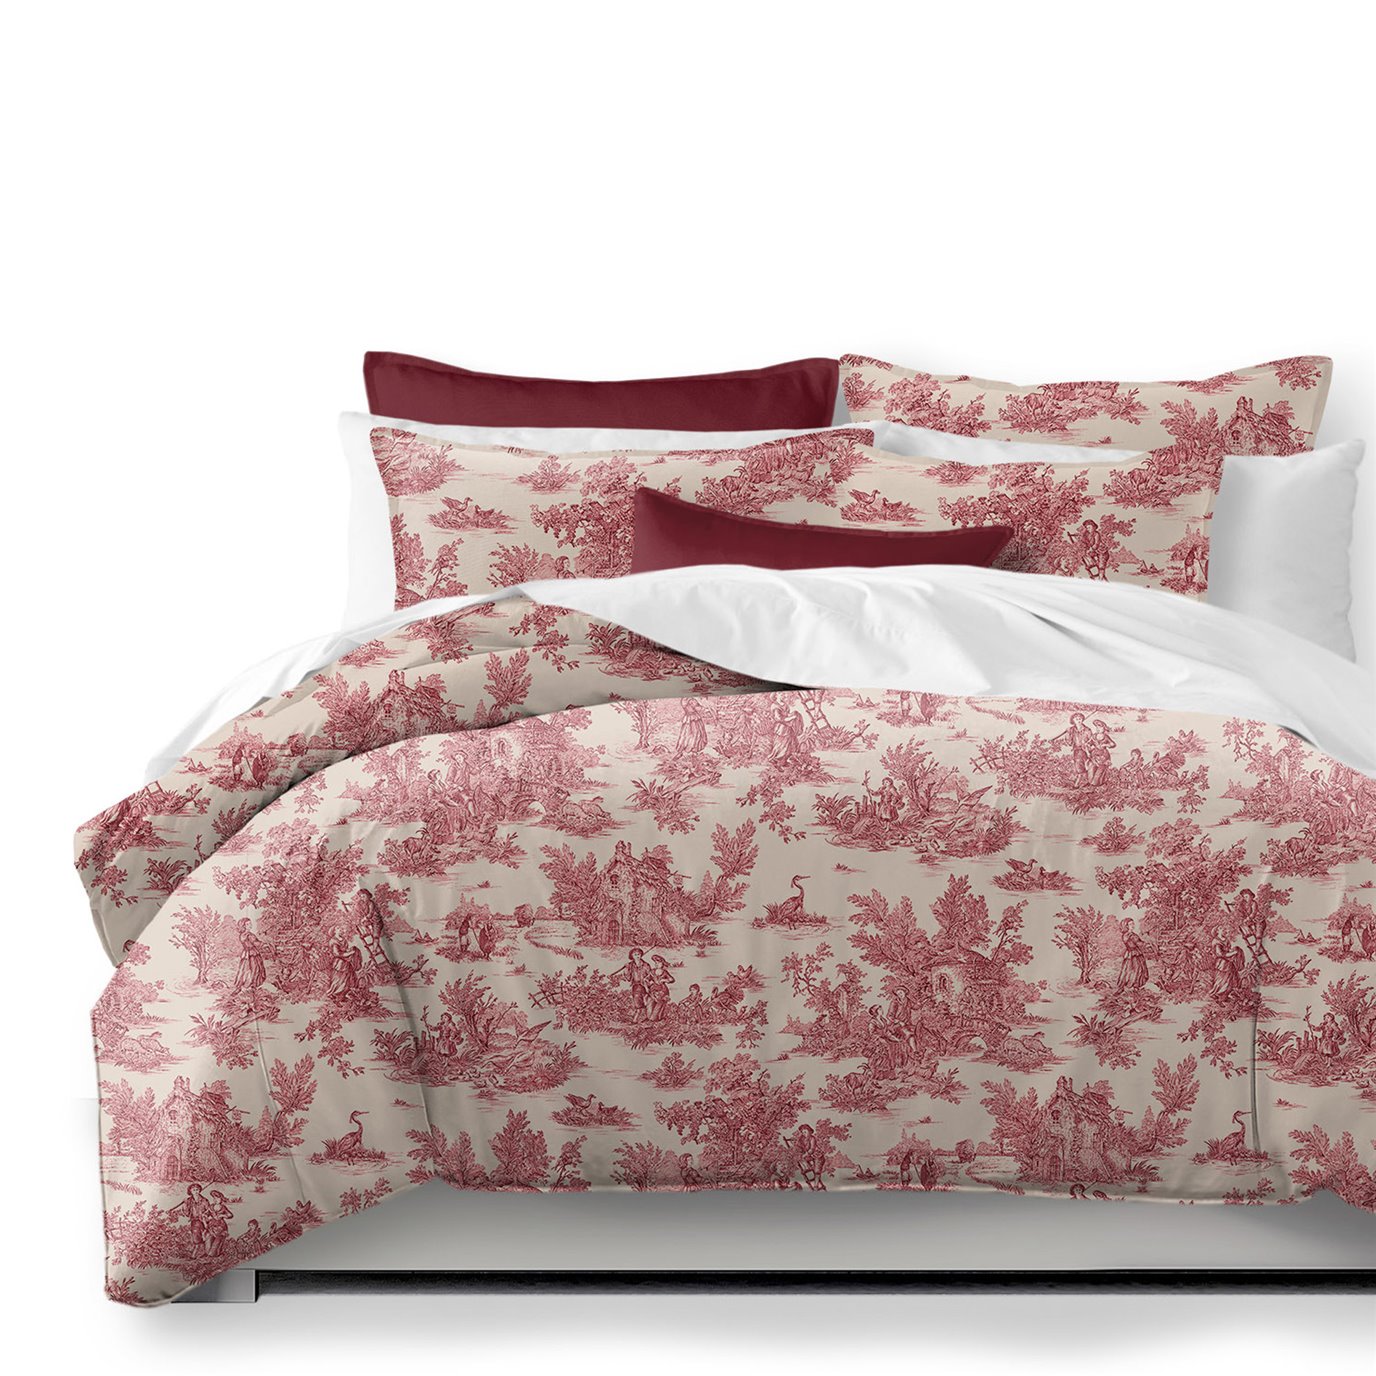 Bouclair Red Coverlet and Pillow Sham(s) Set - Size Queen